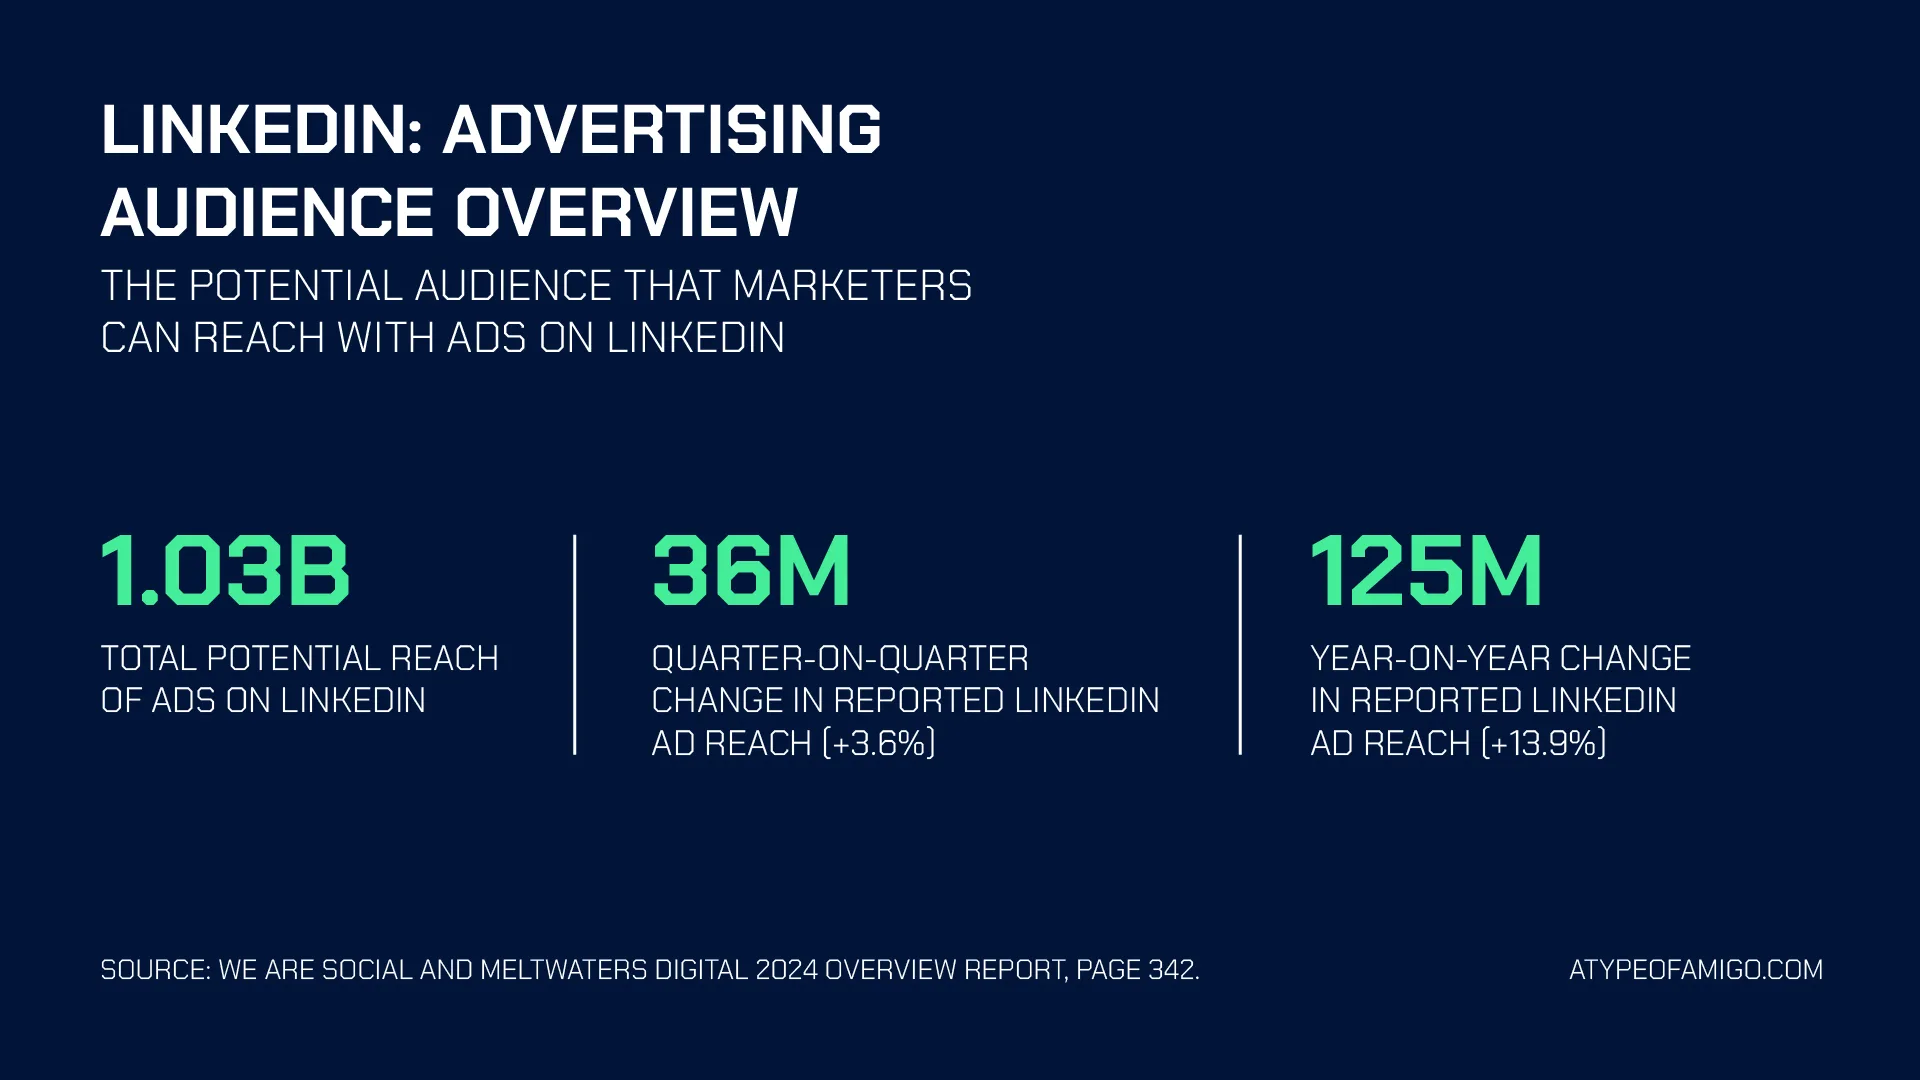 Linkedin: Advertising audience overview